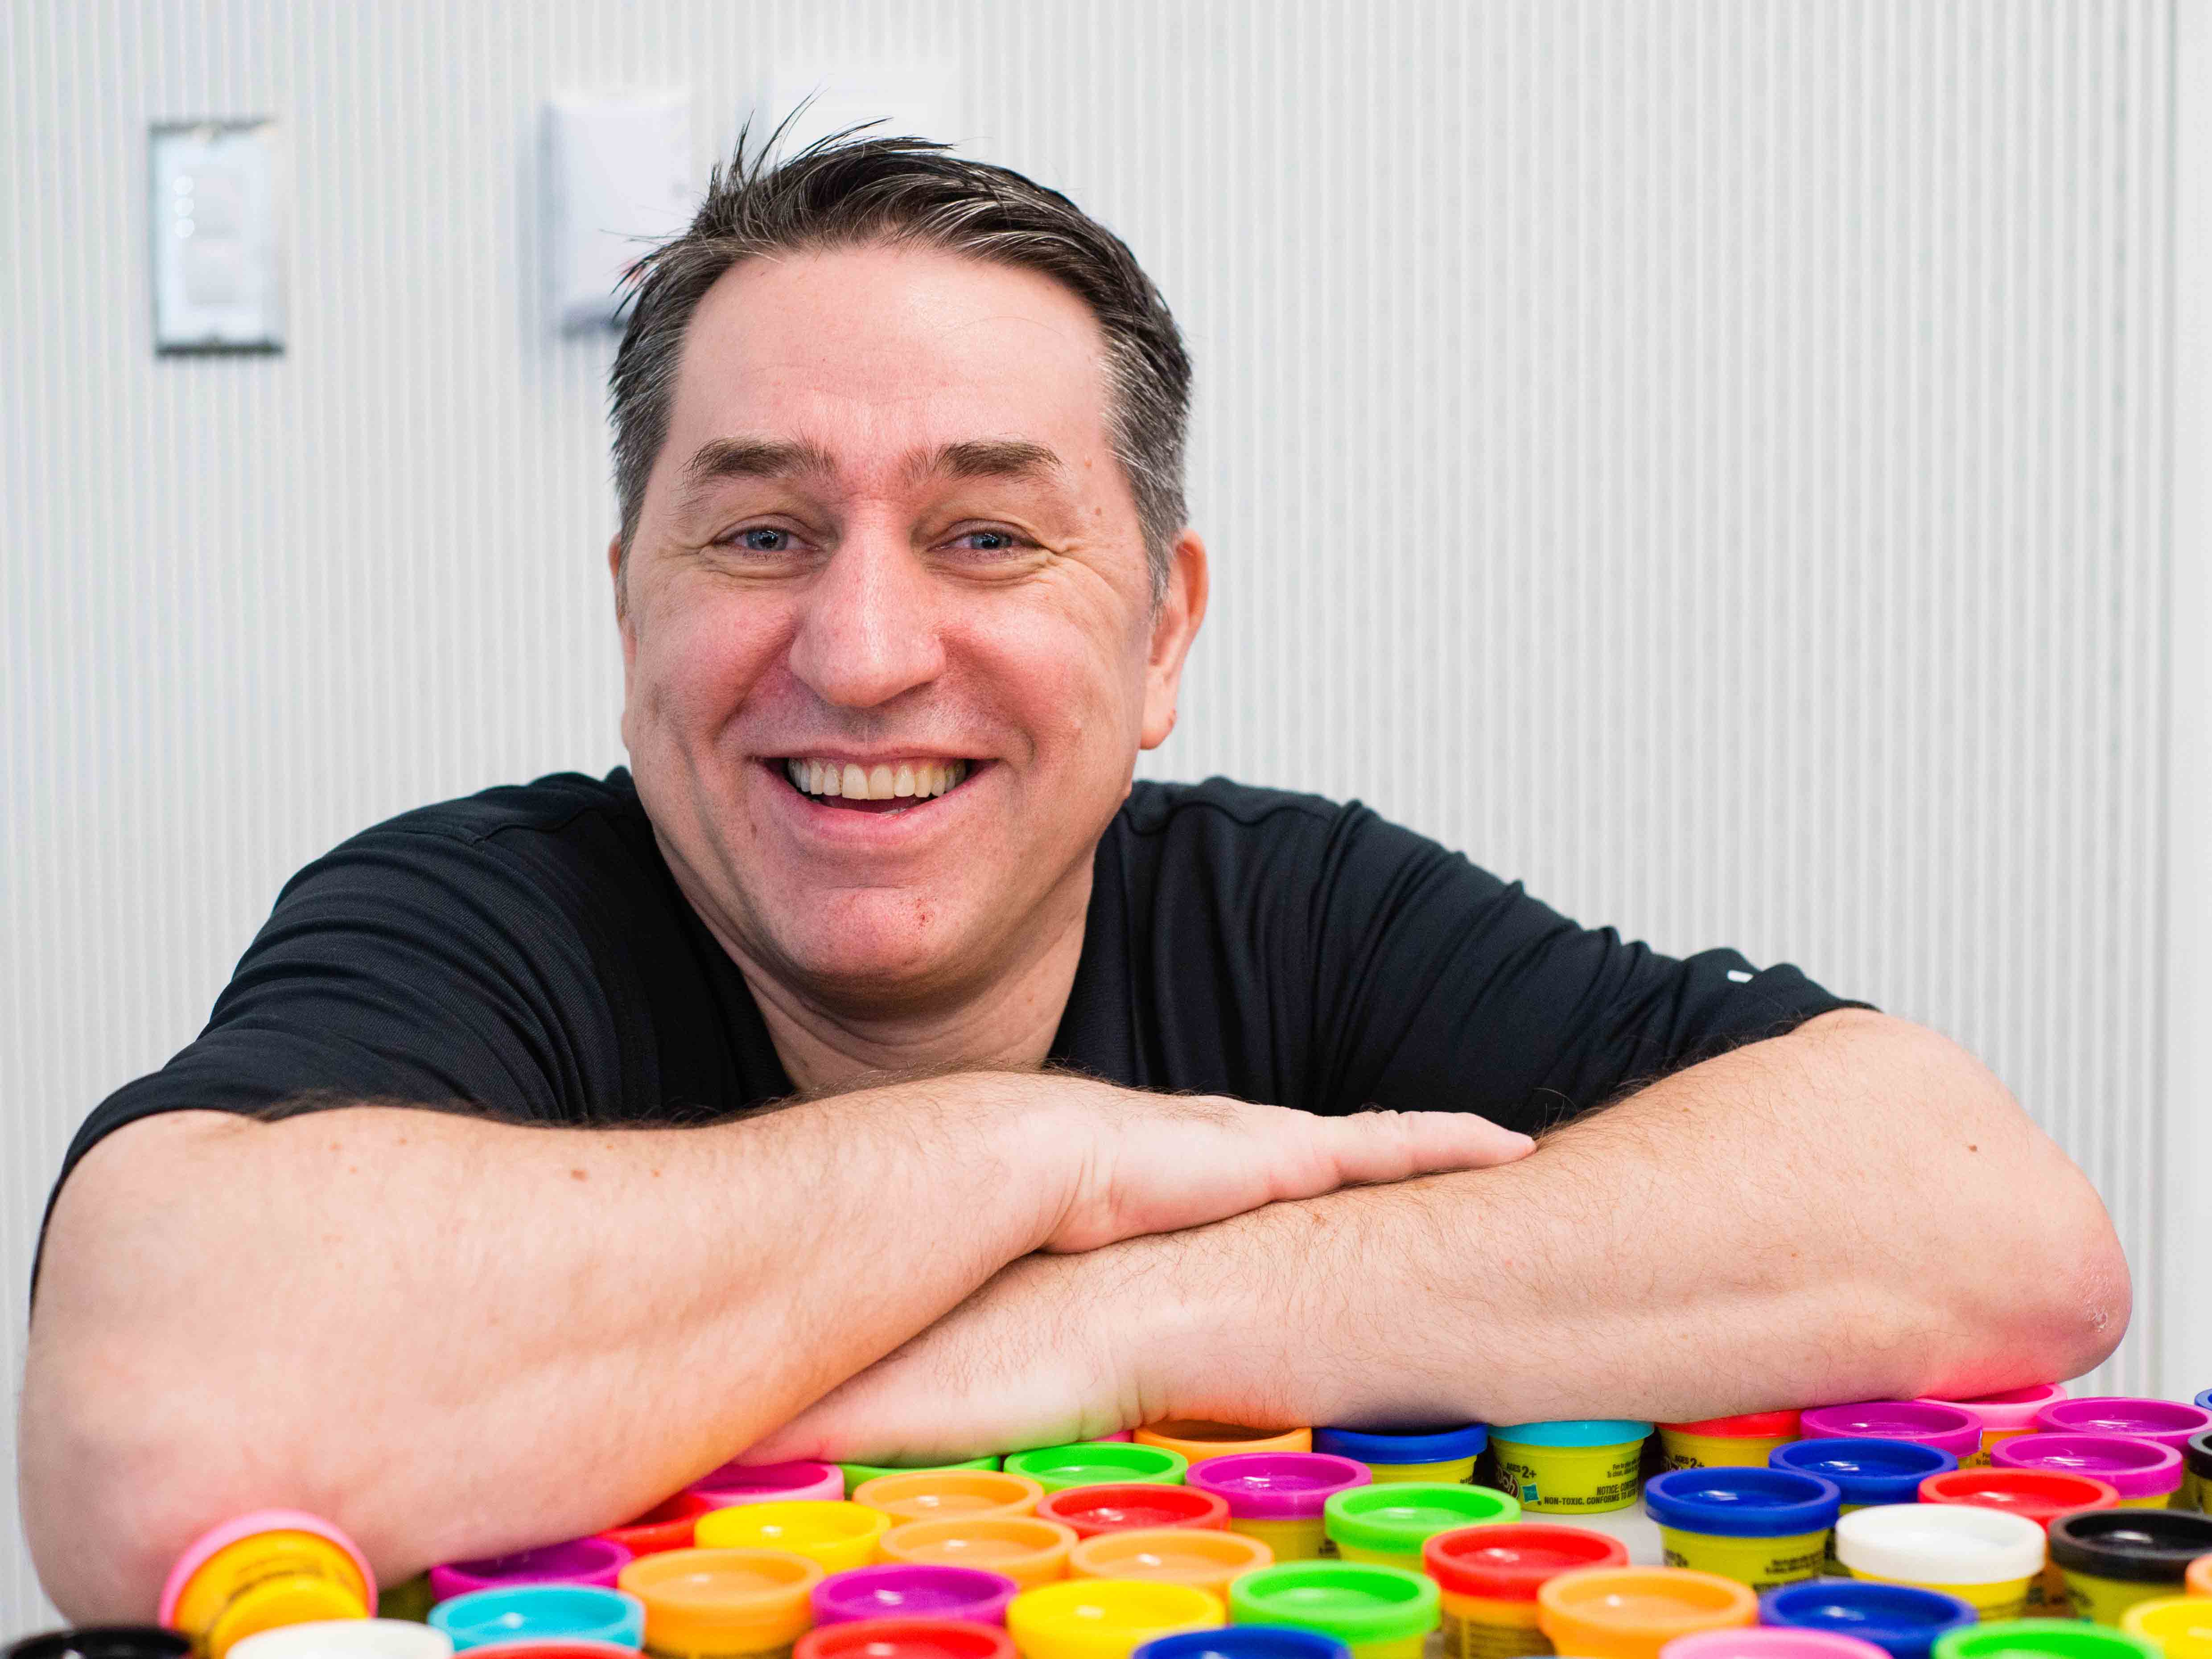 Dark-haired man smiles with his arms resting atop an array of small containers of Play-Doh